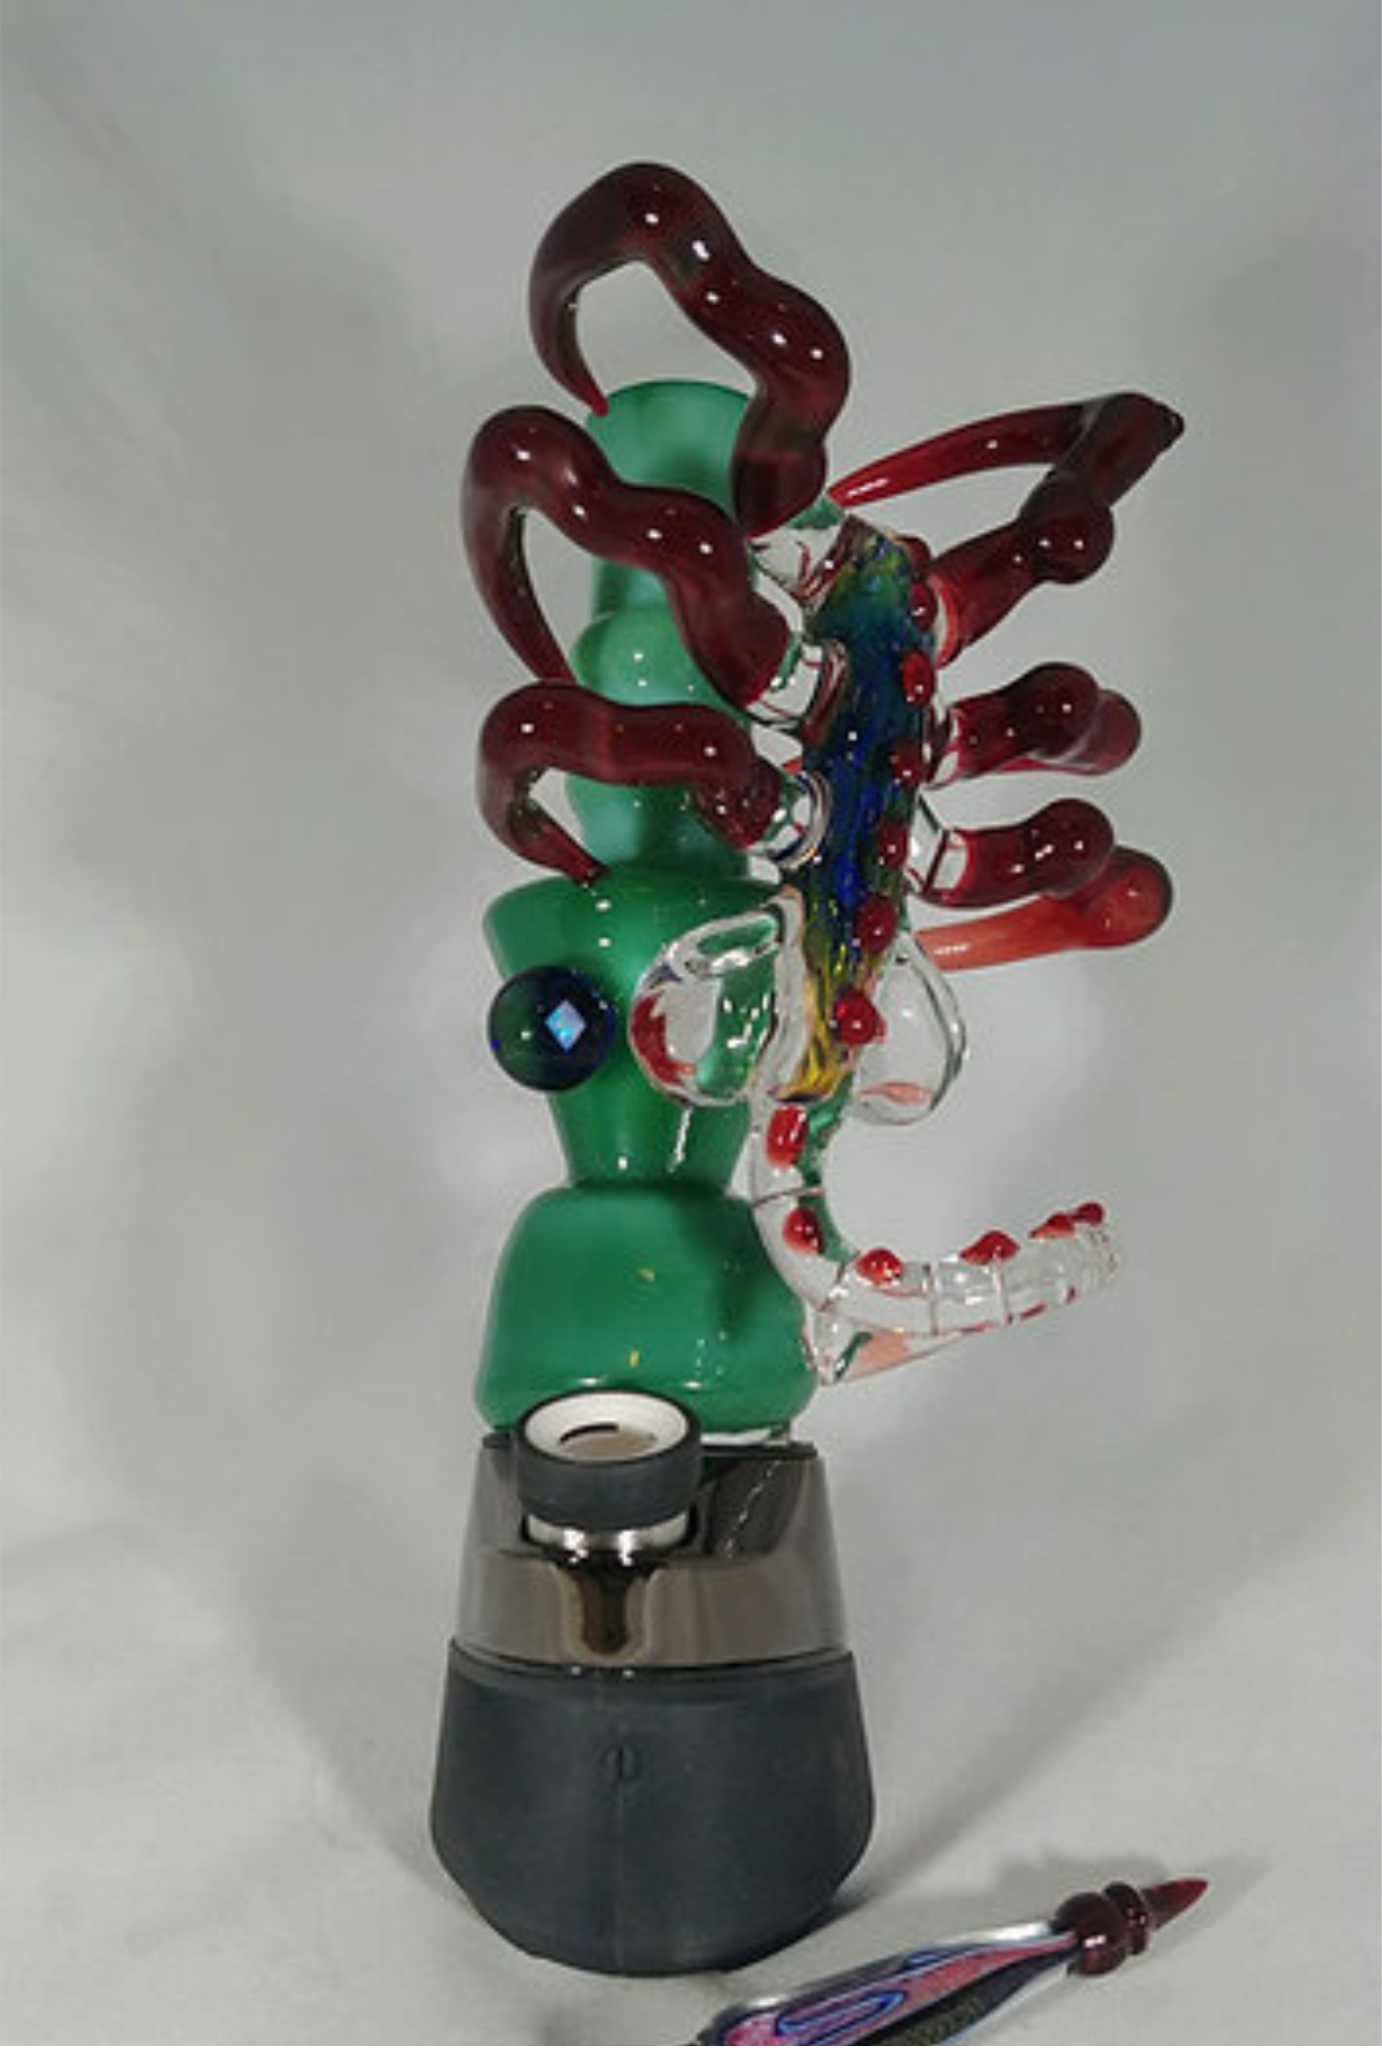 files/Alien_Face_Hugger_Puffco_Attachment_with_LED_-_GiggleGlass-1198989.png